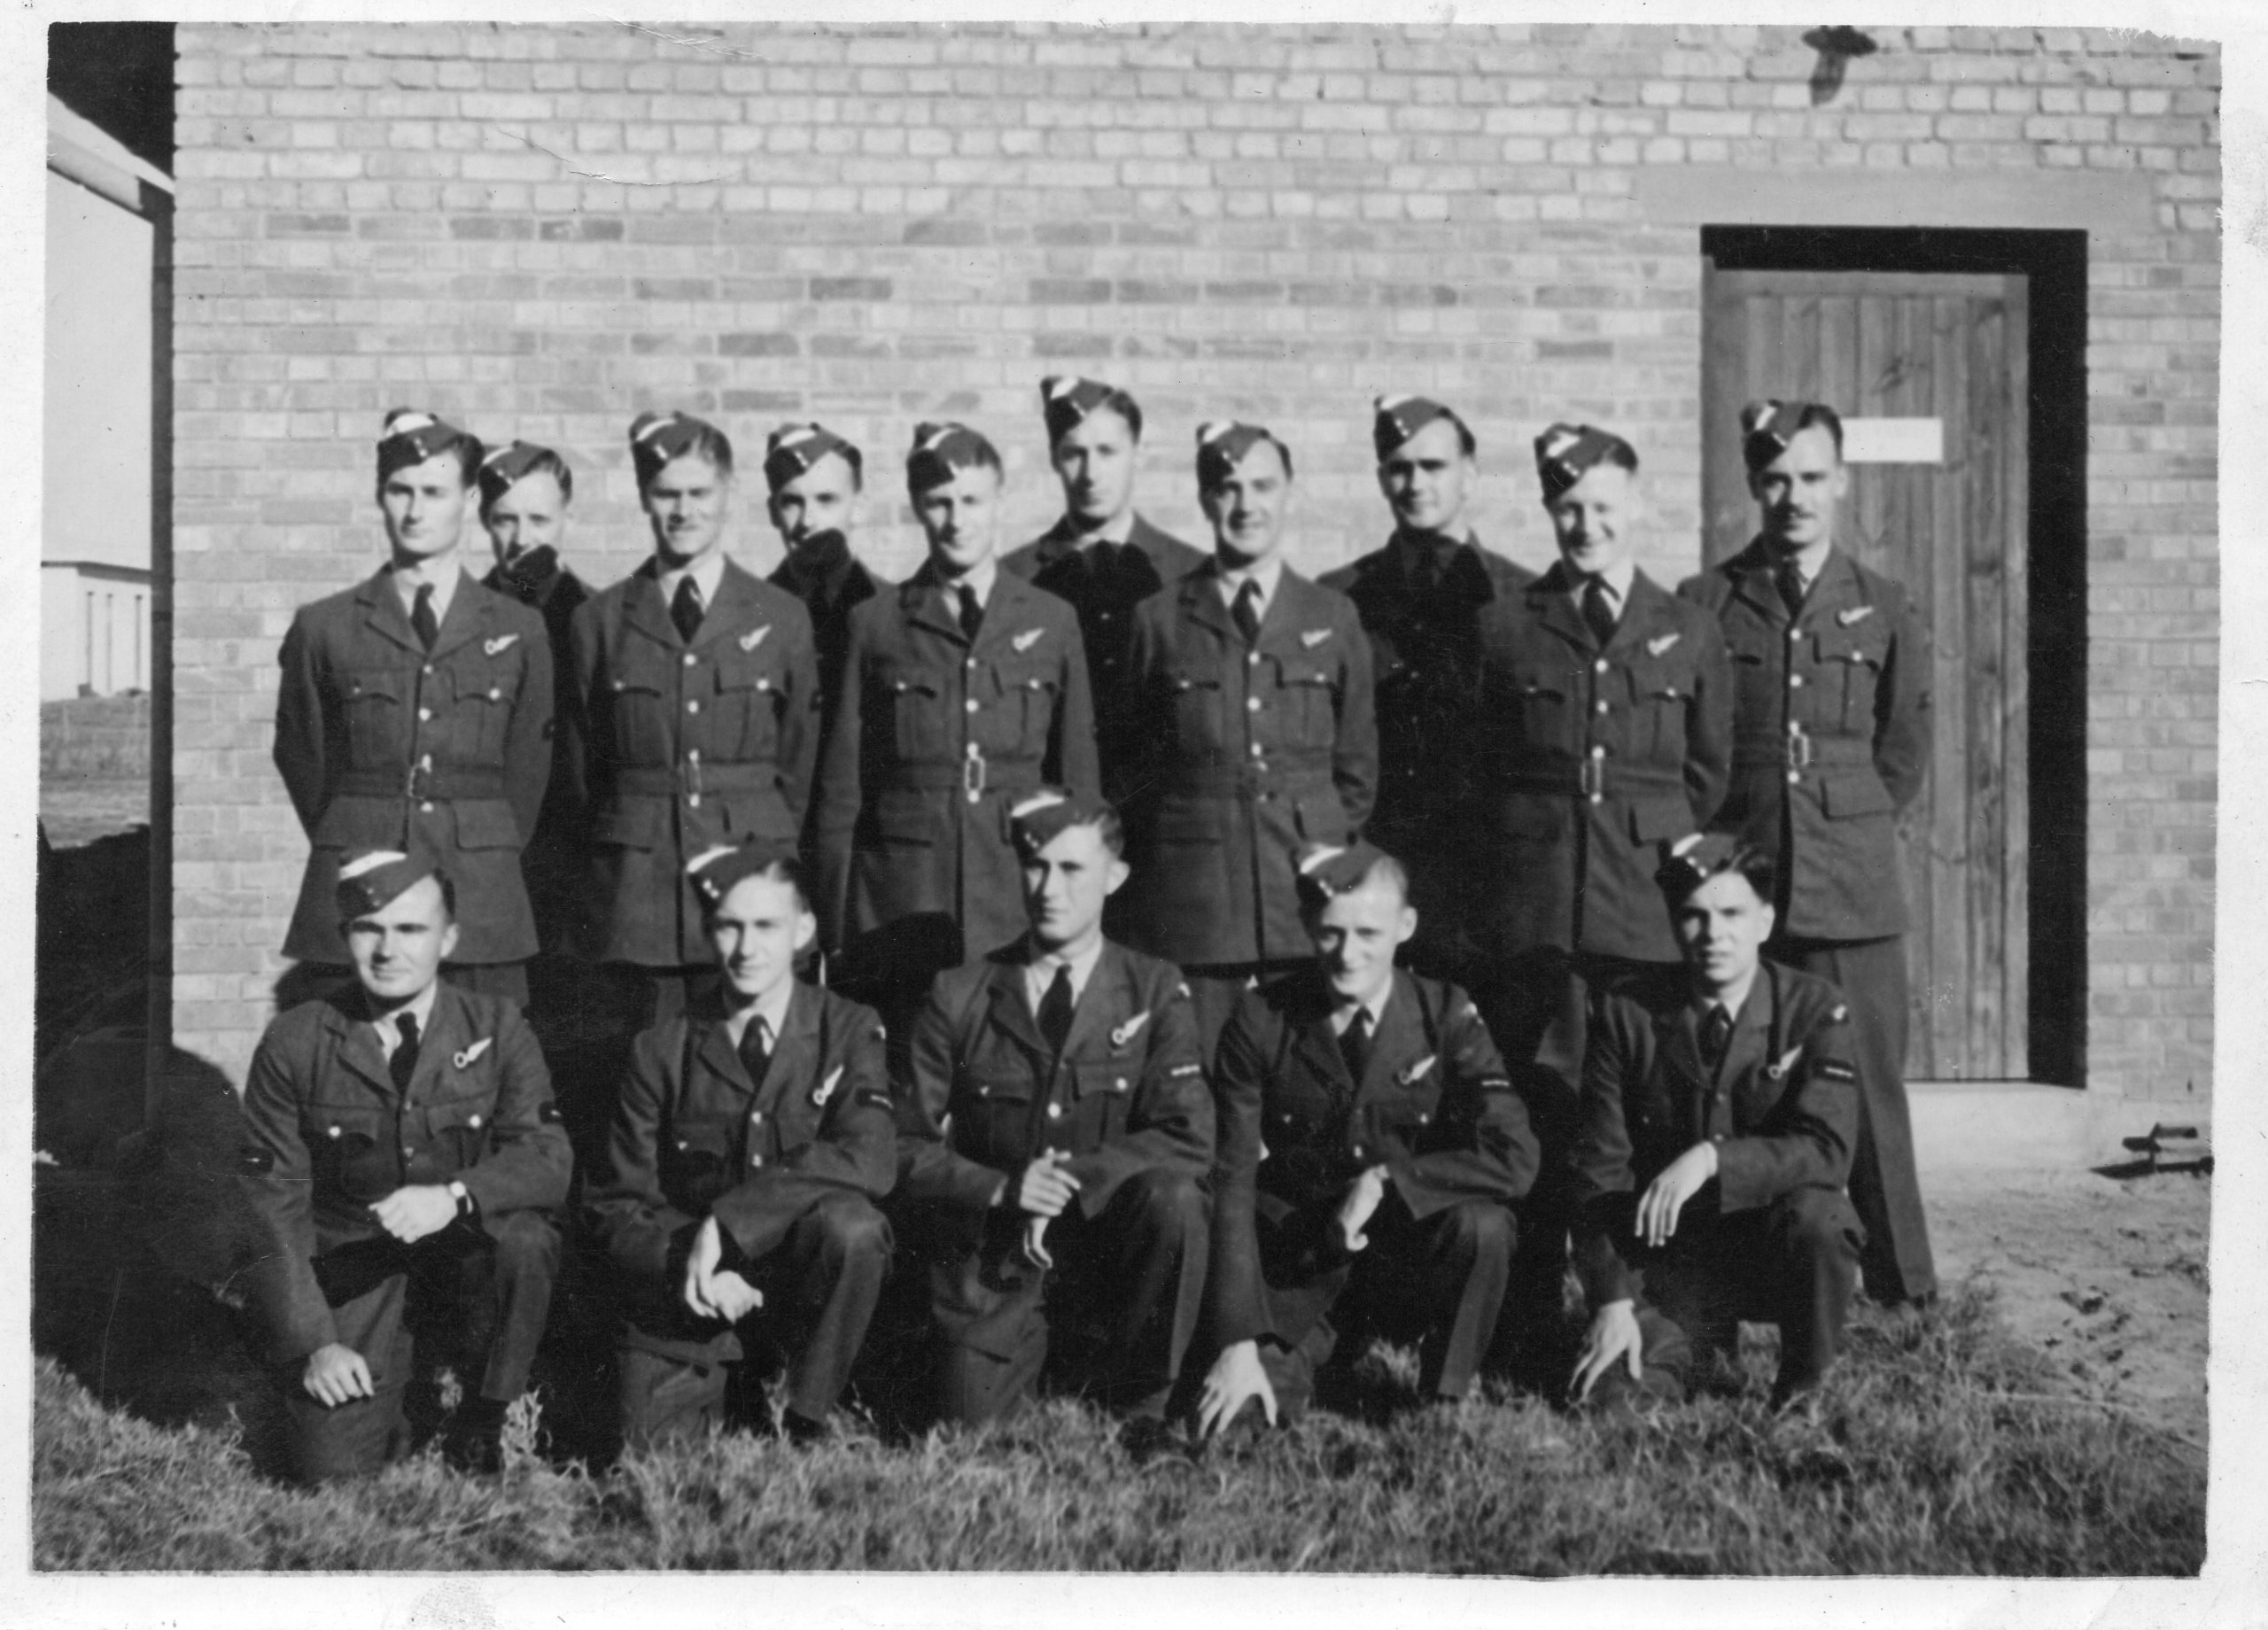 Group of 15 airmen, J C McGhee, front, 2nd from left